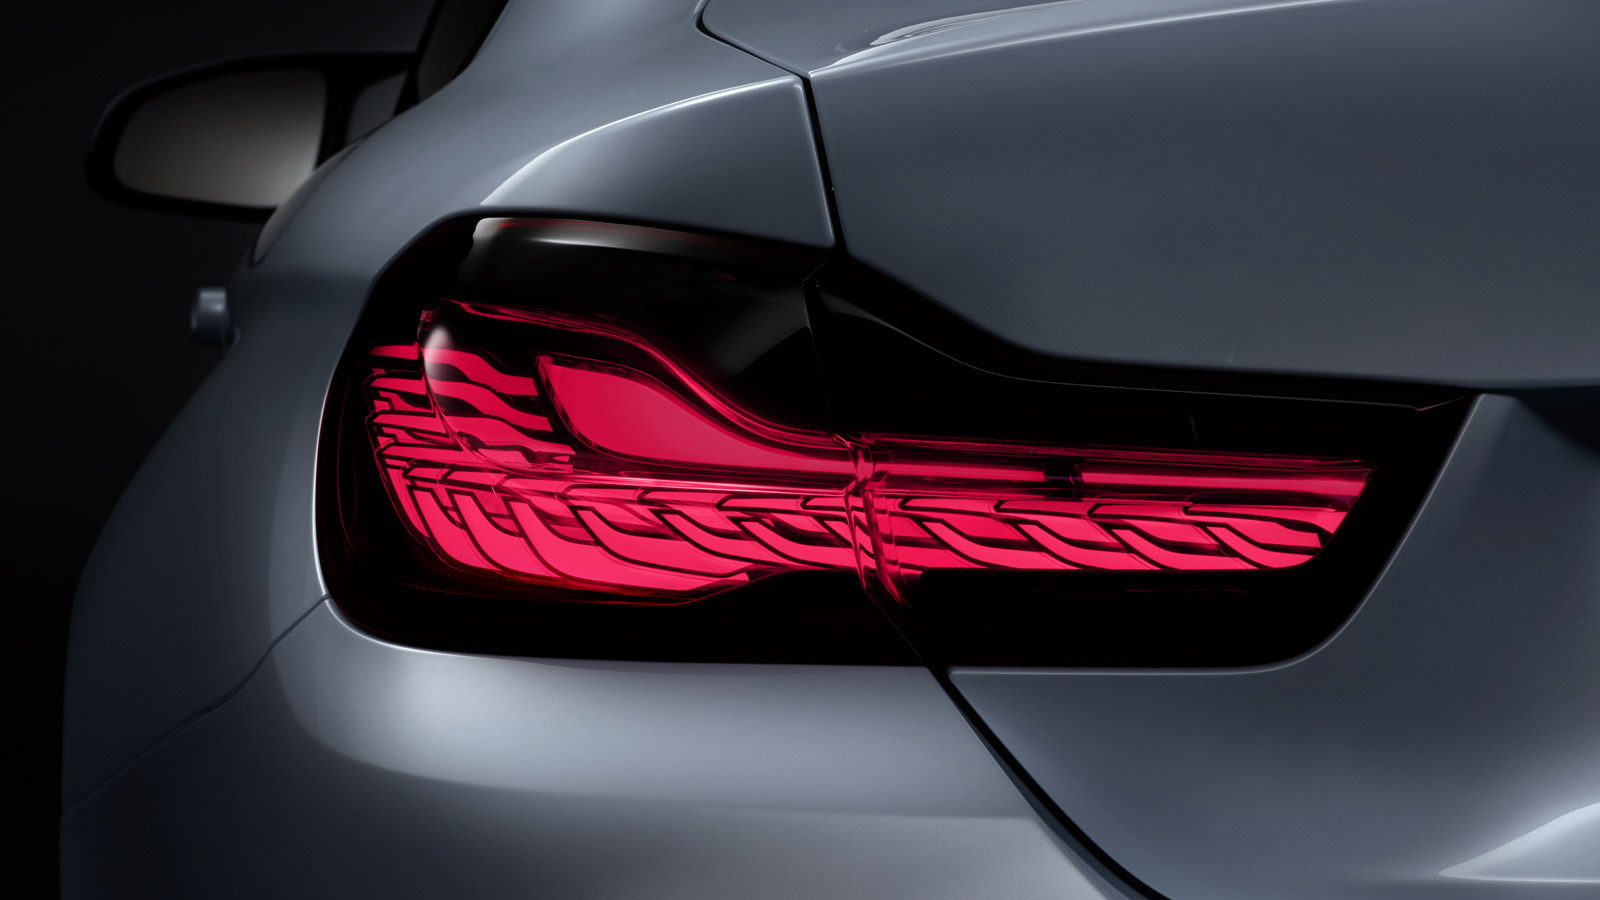 BMW M4 Concept Iconic Lights, 2015 Consumer Electronics Show